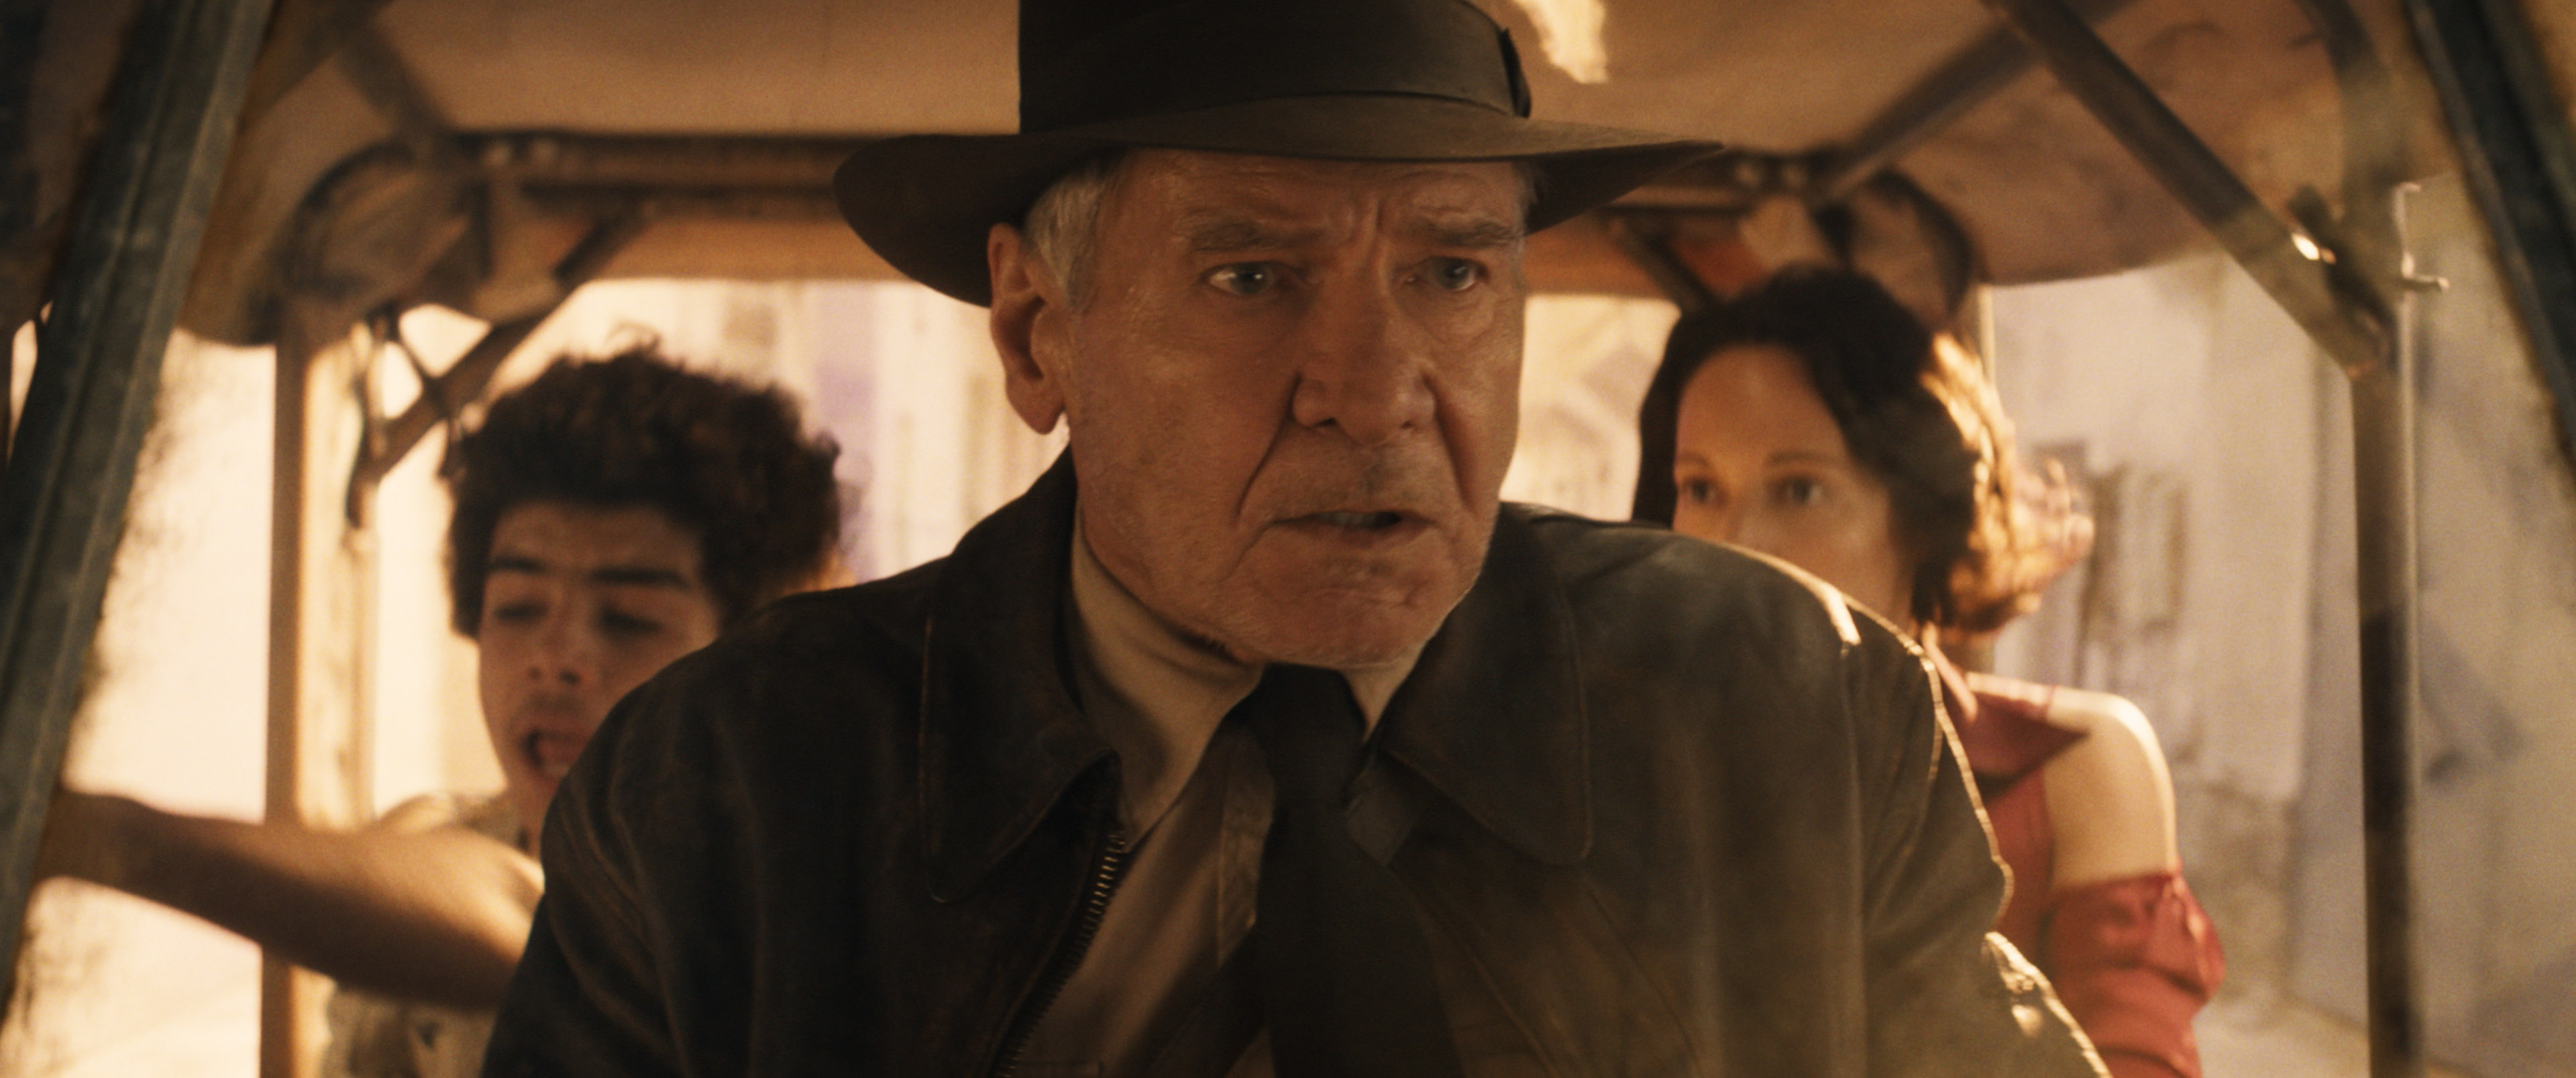 ‘Indiana Jones and the Dial of Destiny’ Gets Digital Release Date